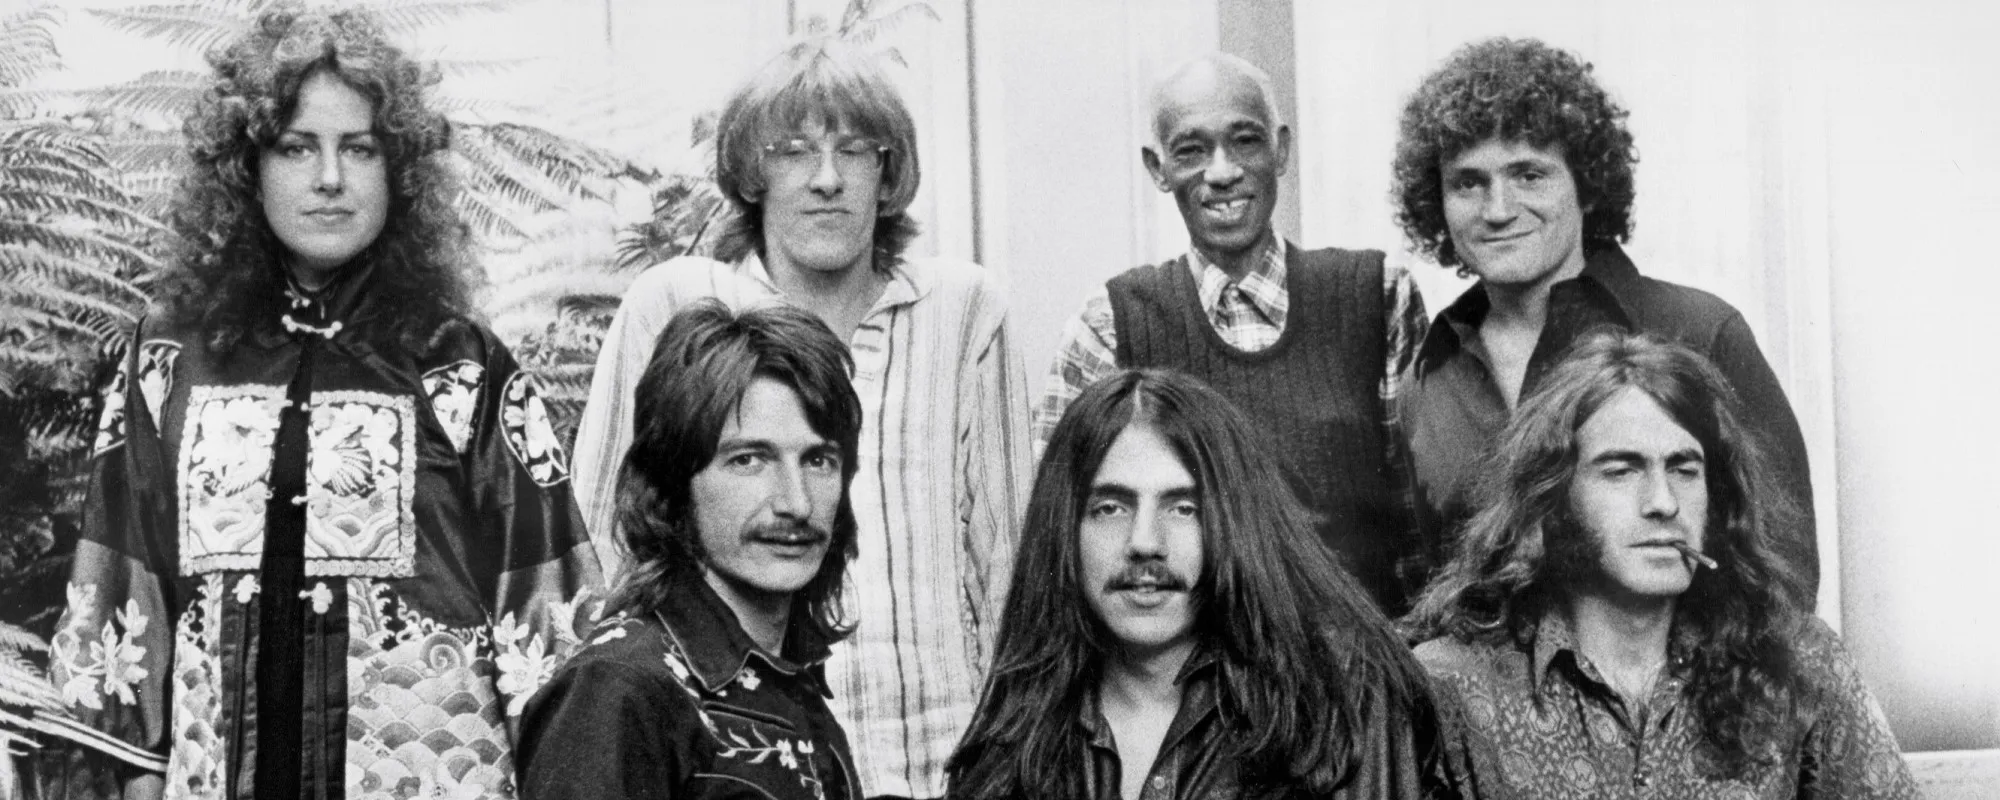 Jefferson Airplane Was Relaunched as Jefferson Starship 50 Years Ago